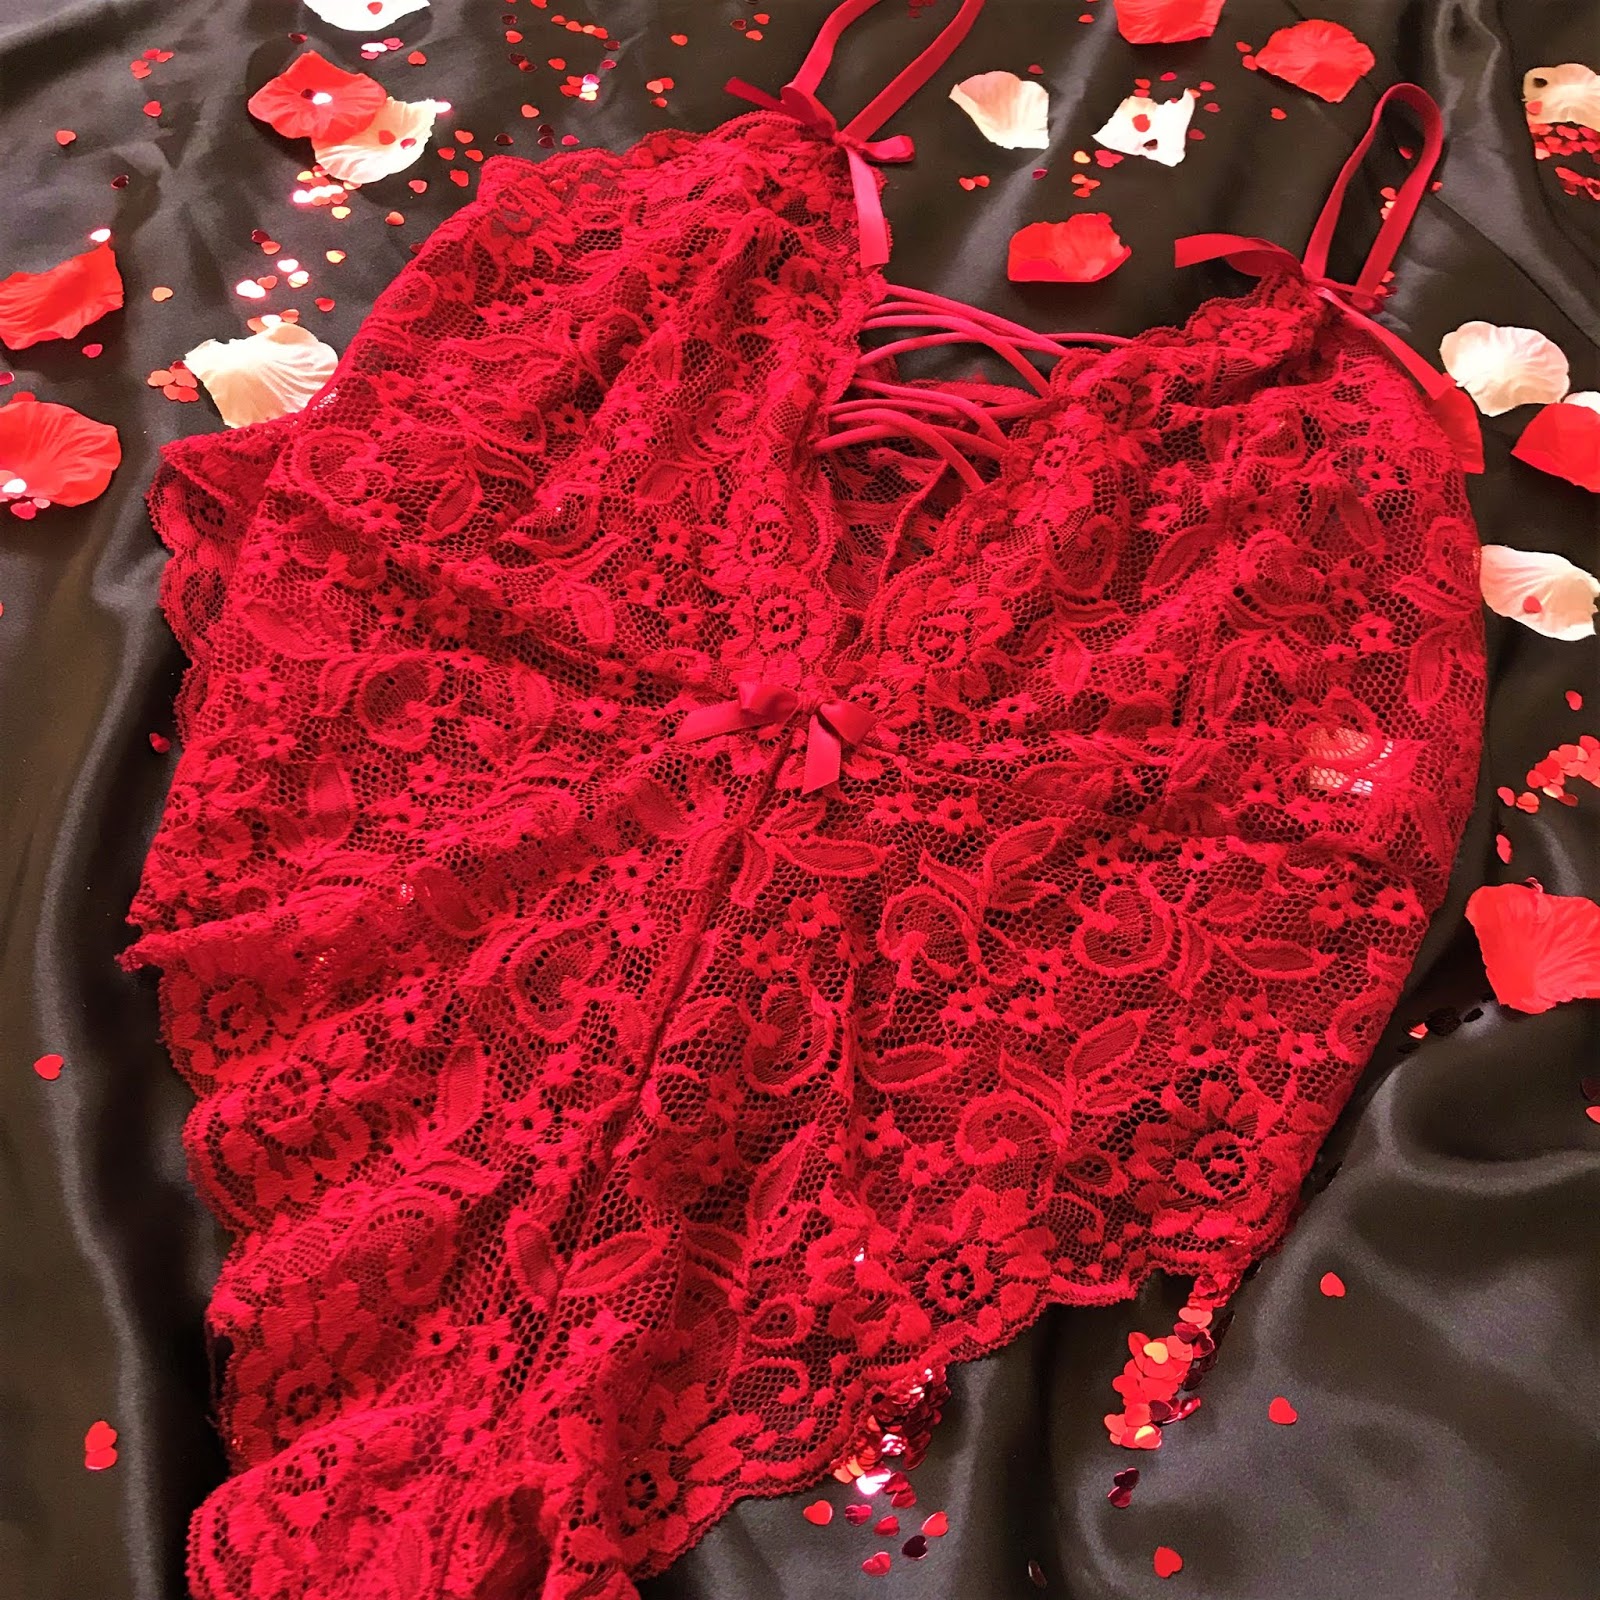 Affordable SHEIN Valentines Lingerie Haul ❤ - ○ Laura Thornberry ○  Lifestyle Blogger ○ London Based ○